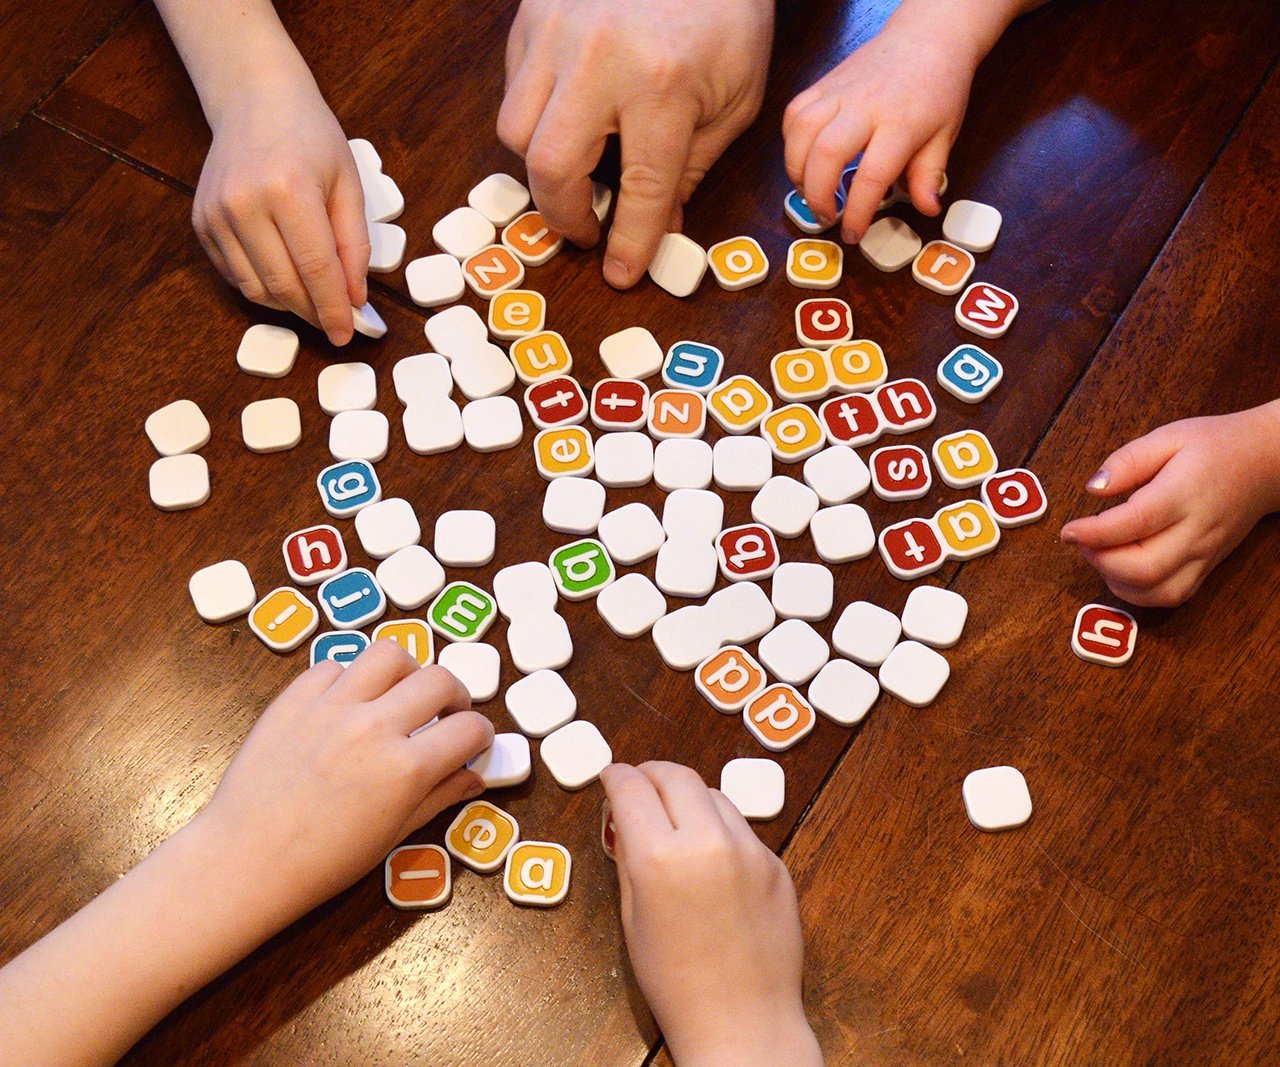 Game On!: How to Plan a Family Game Night